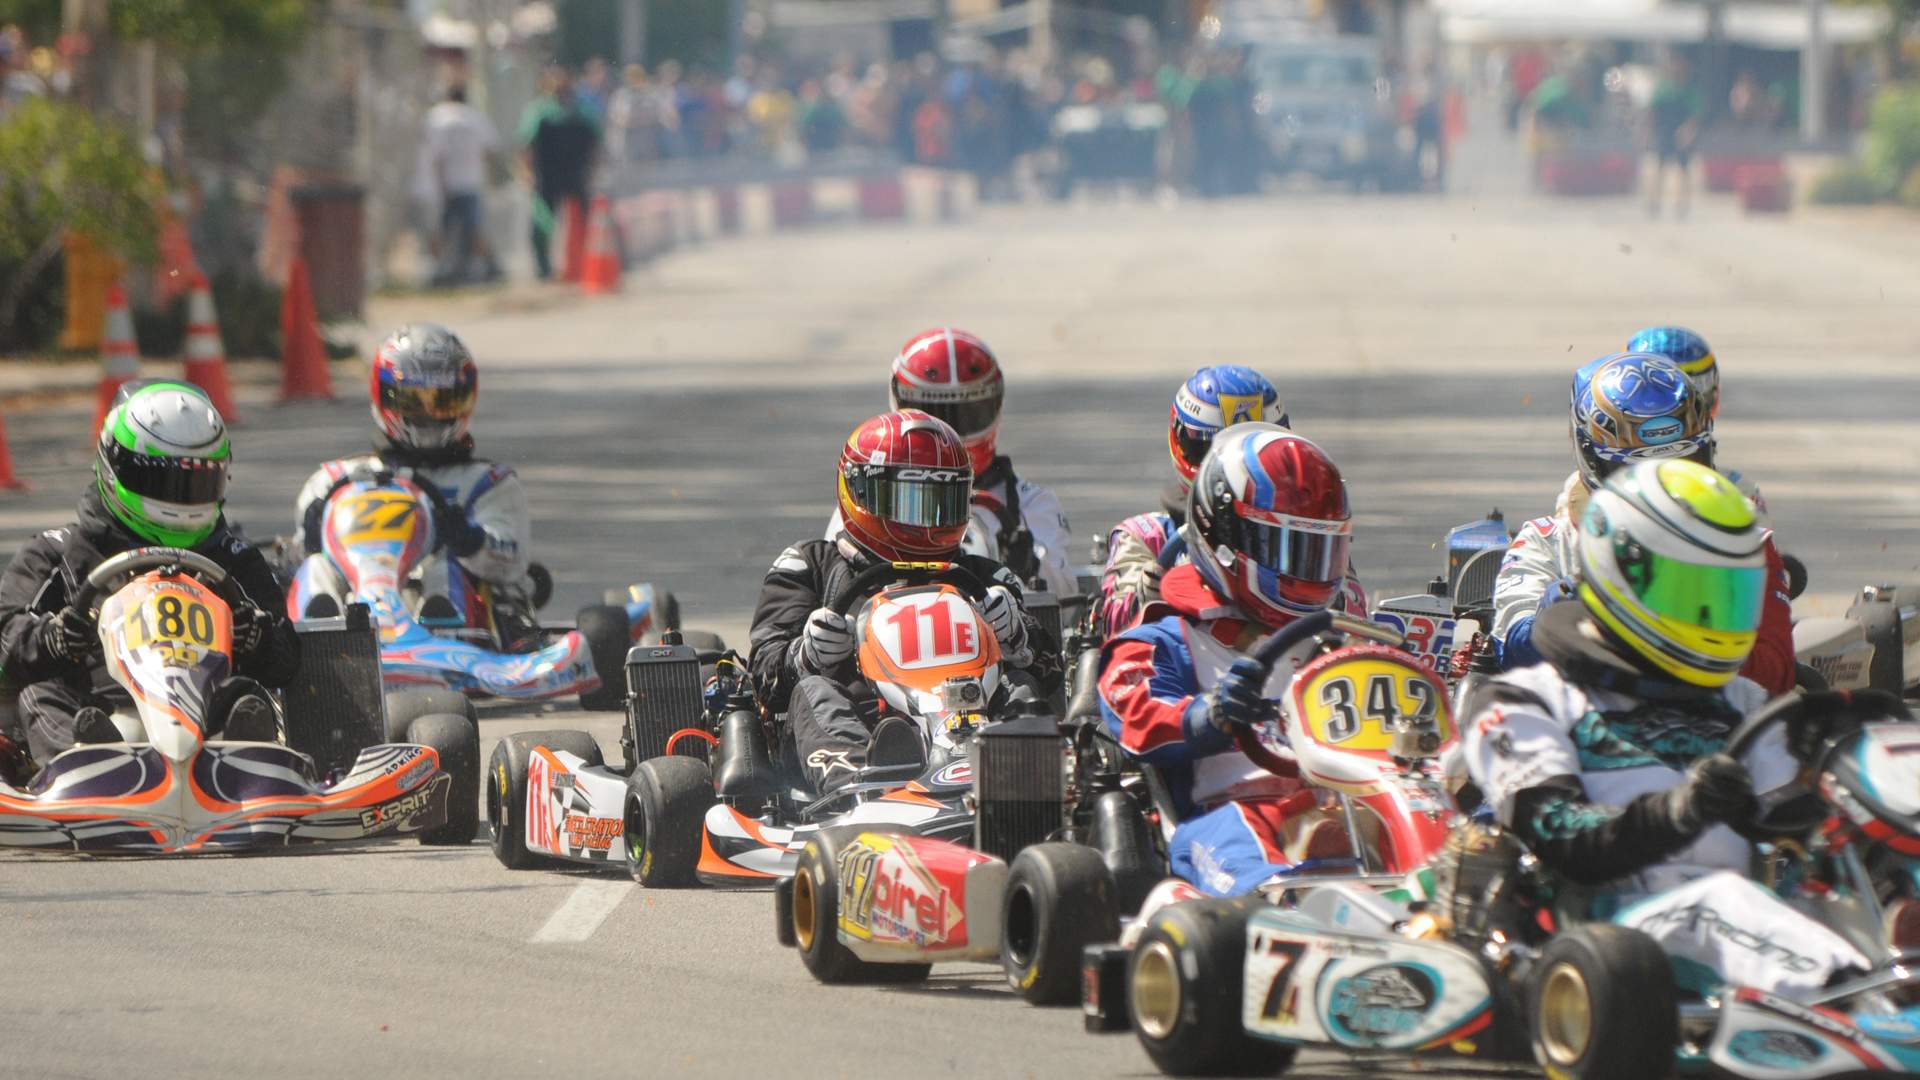 Karts being raced around the track at the Rock Island Grand Prix